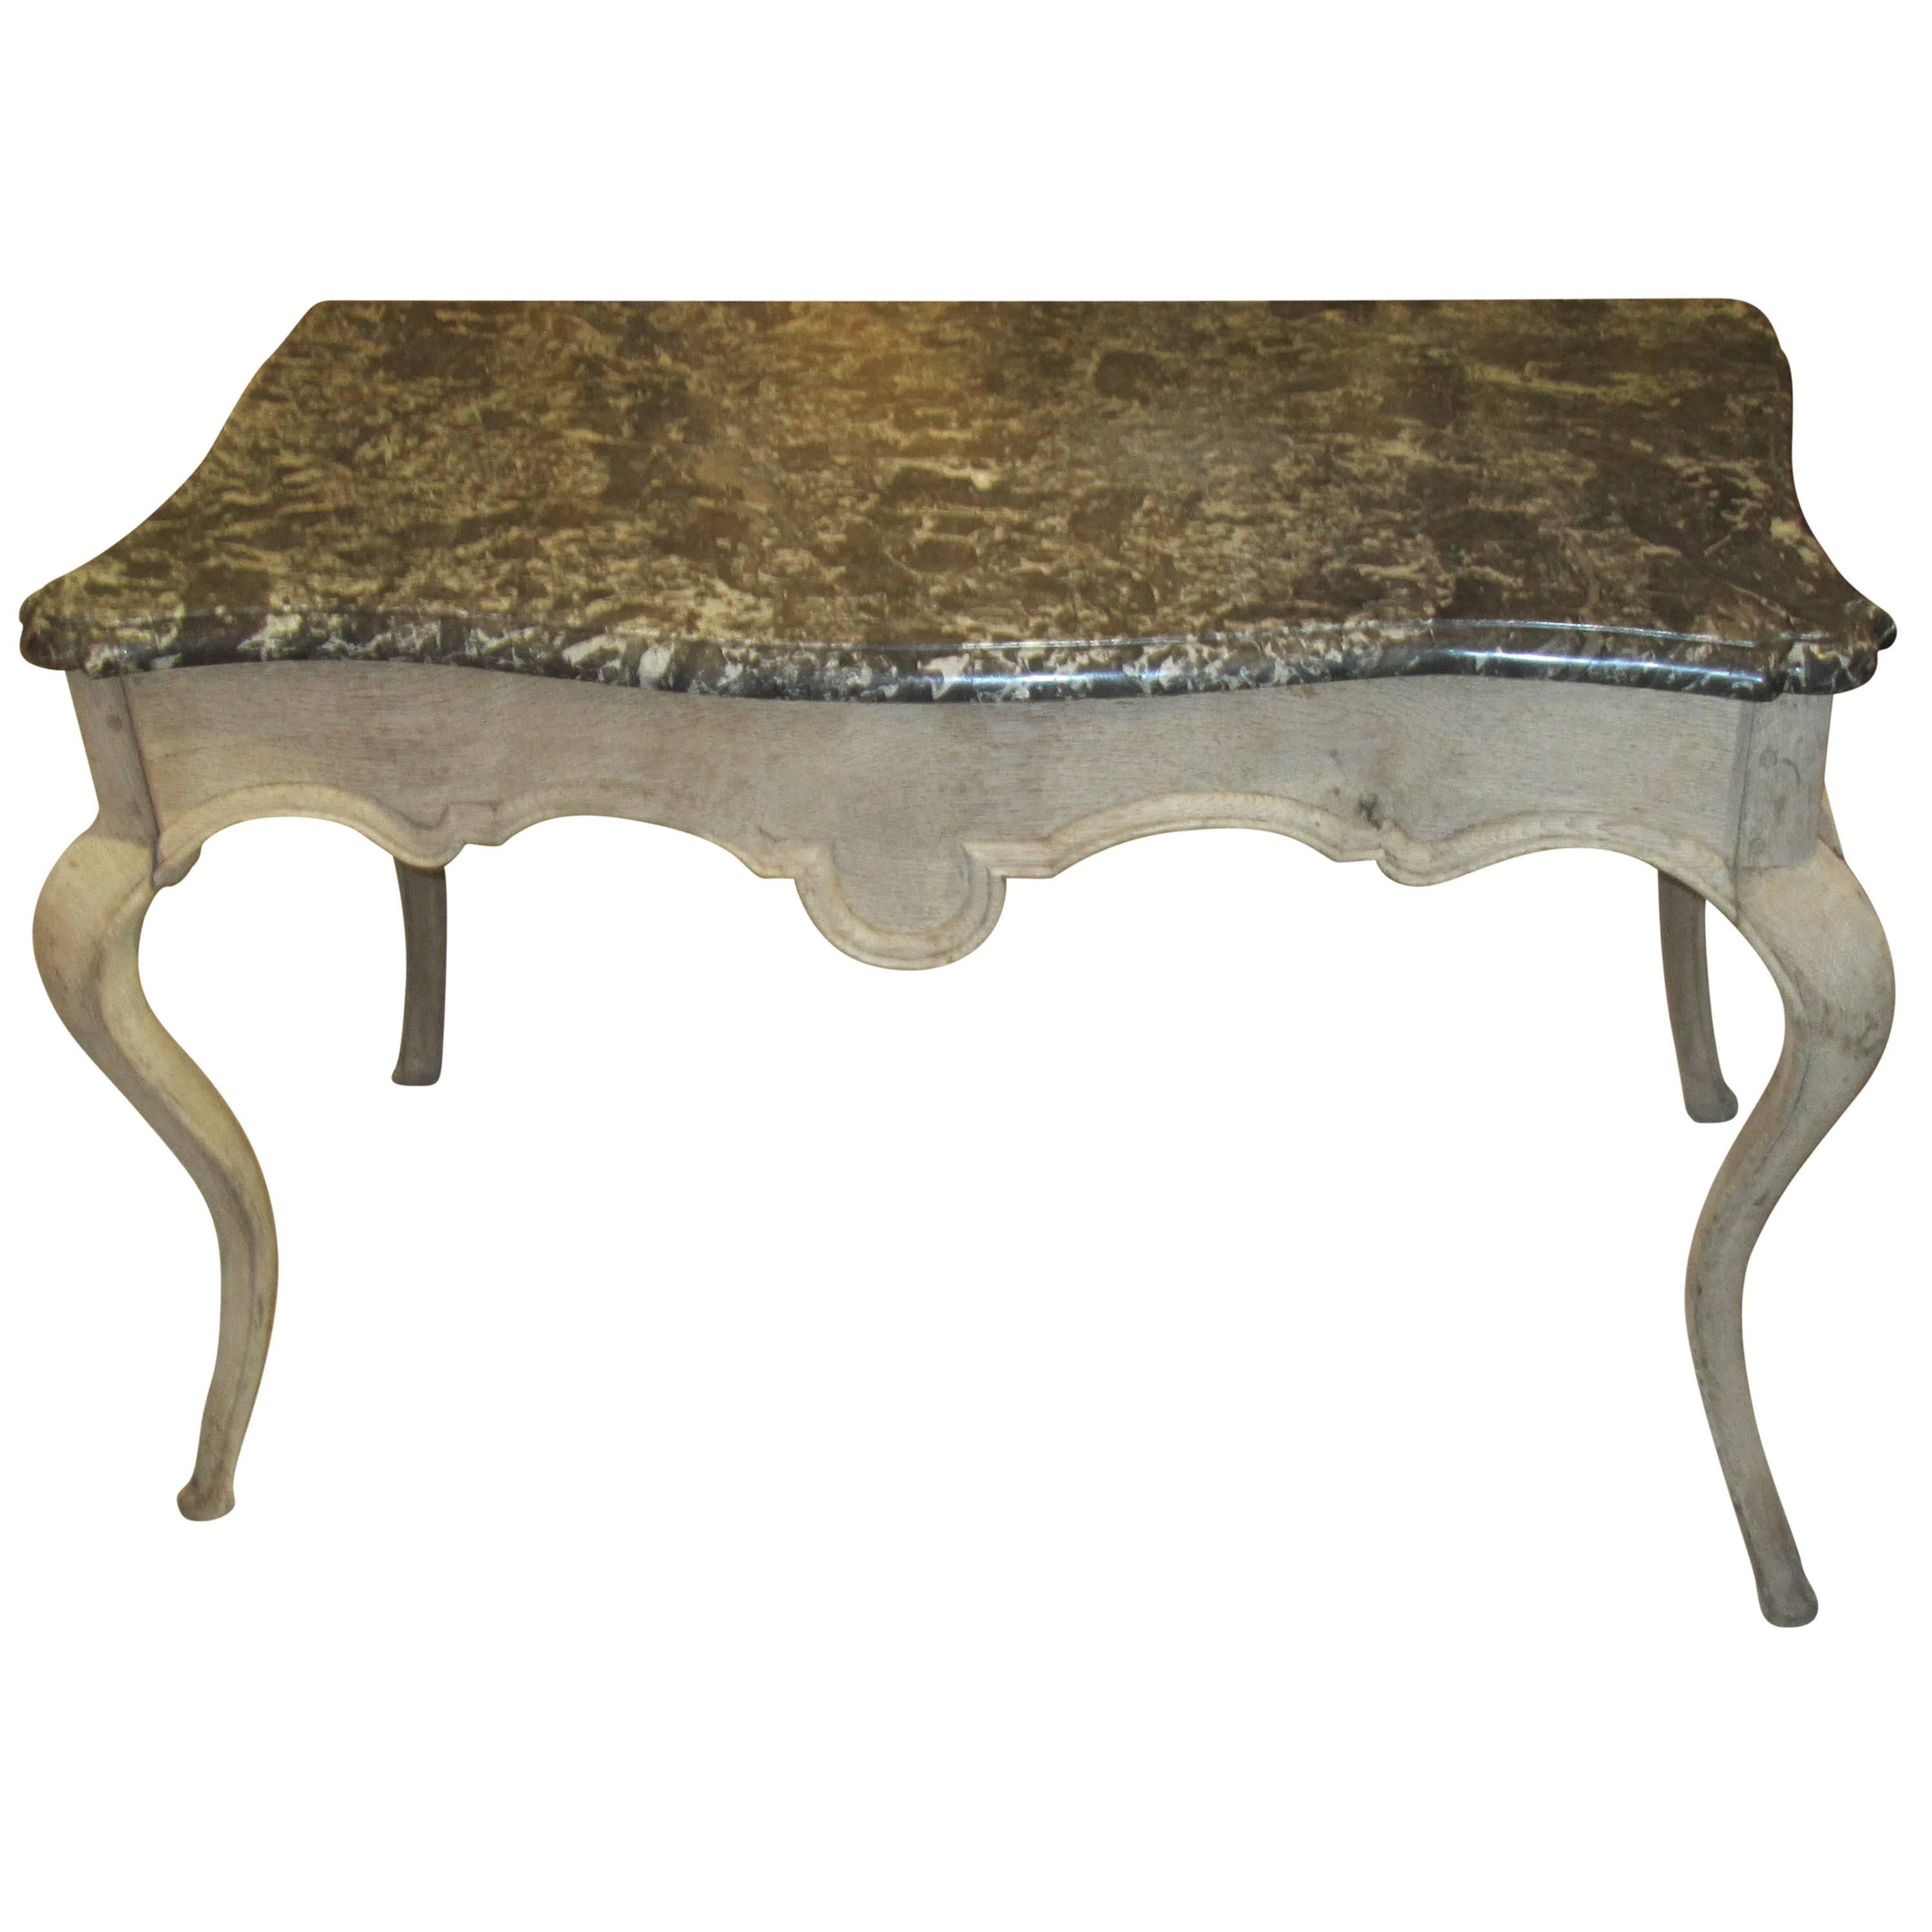 Whimsical Louis XV-style marble-top painted table on sabre legs.